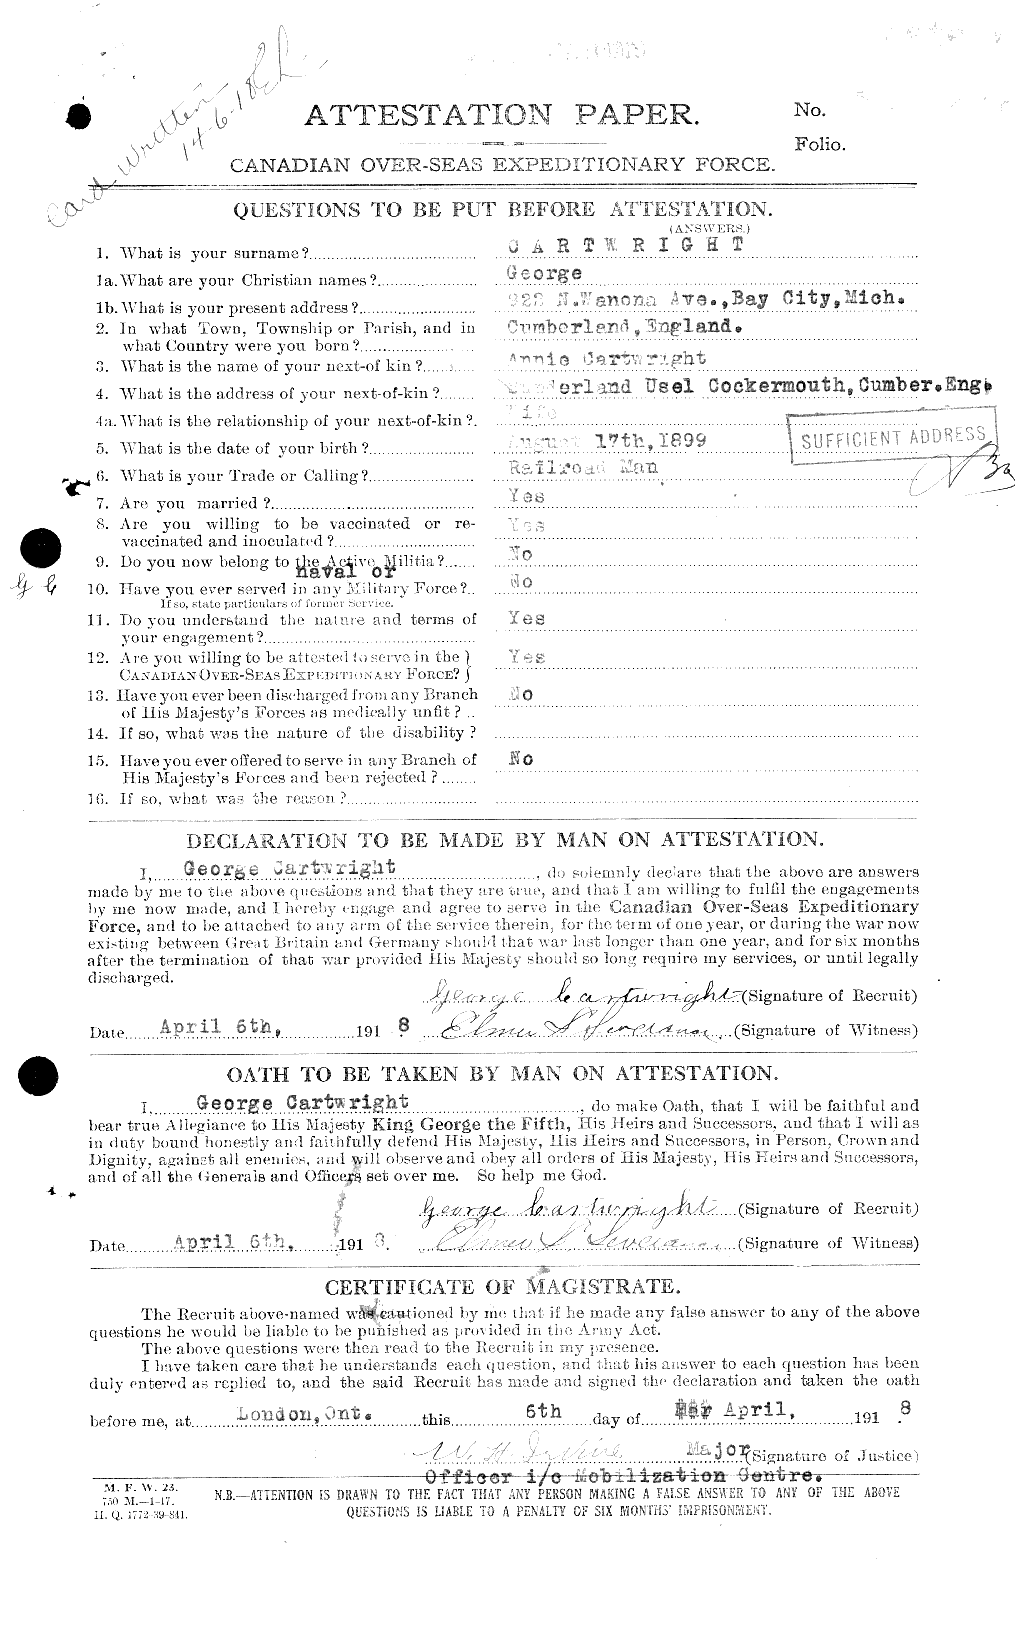 Personnel Records of the First World War - CEF 011576a